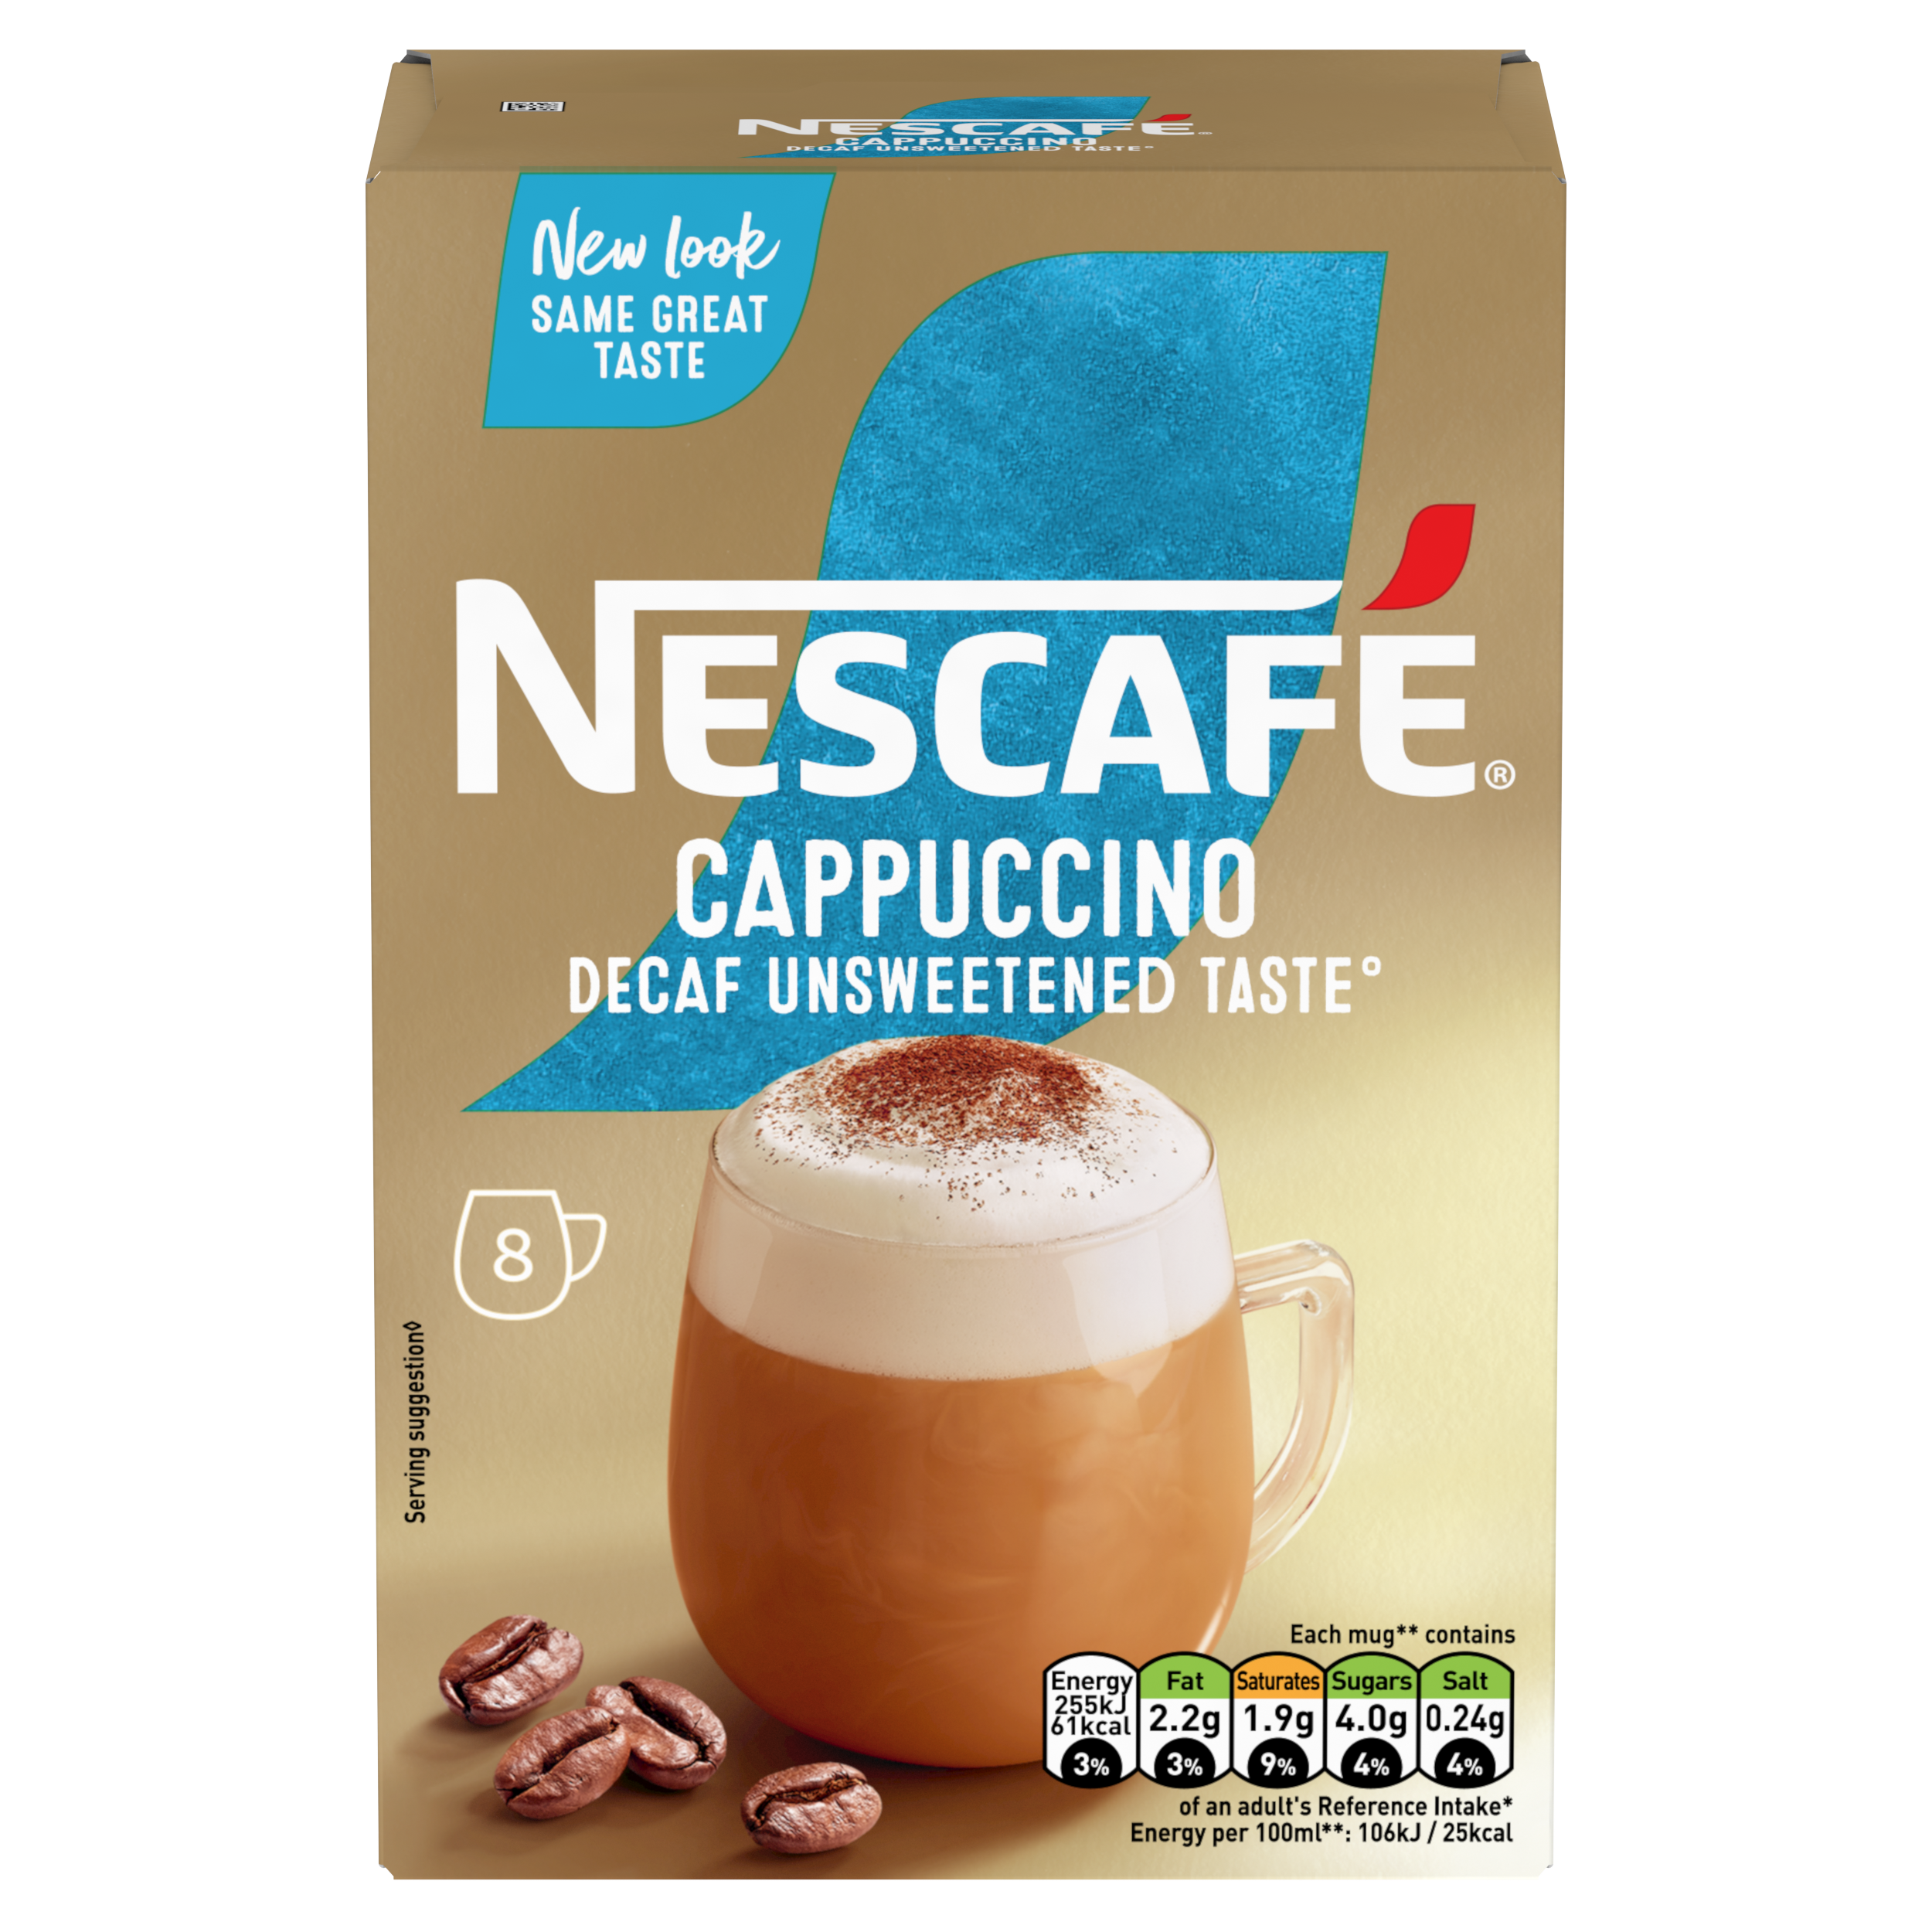 Cappuccino Decaf Unsweetened Taste